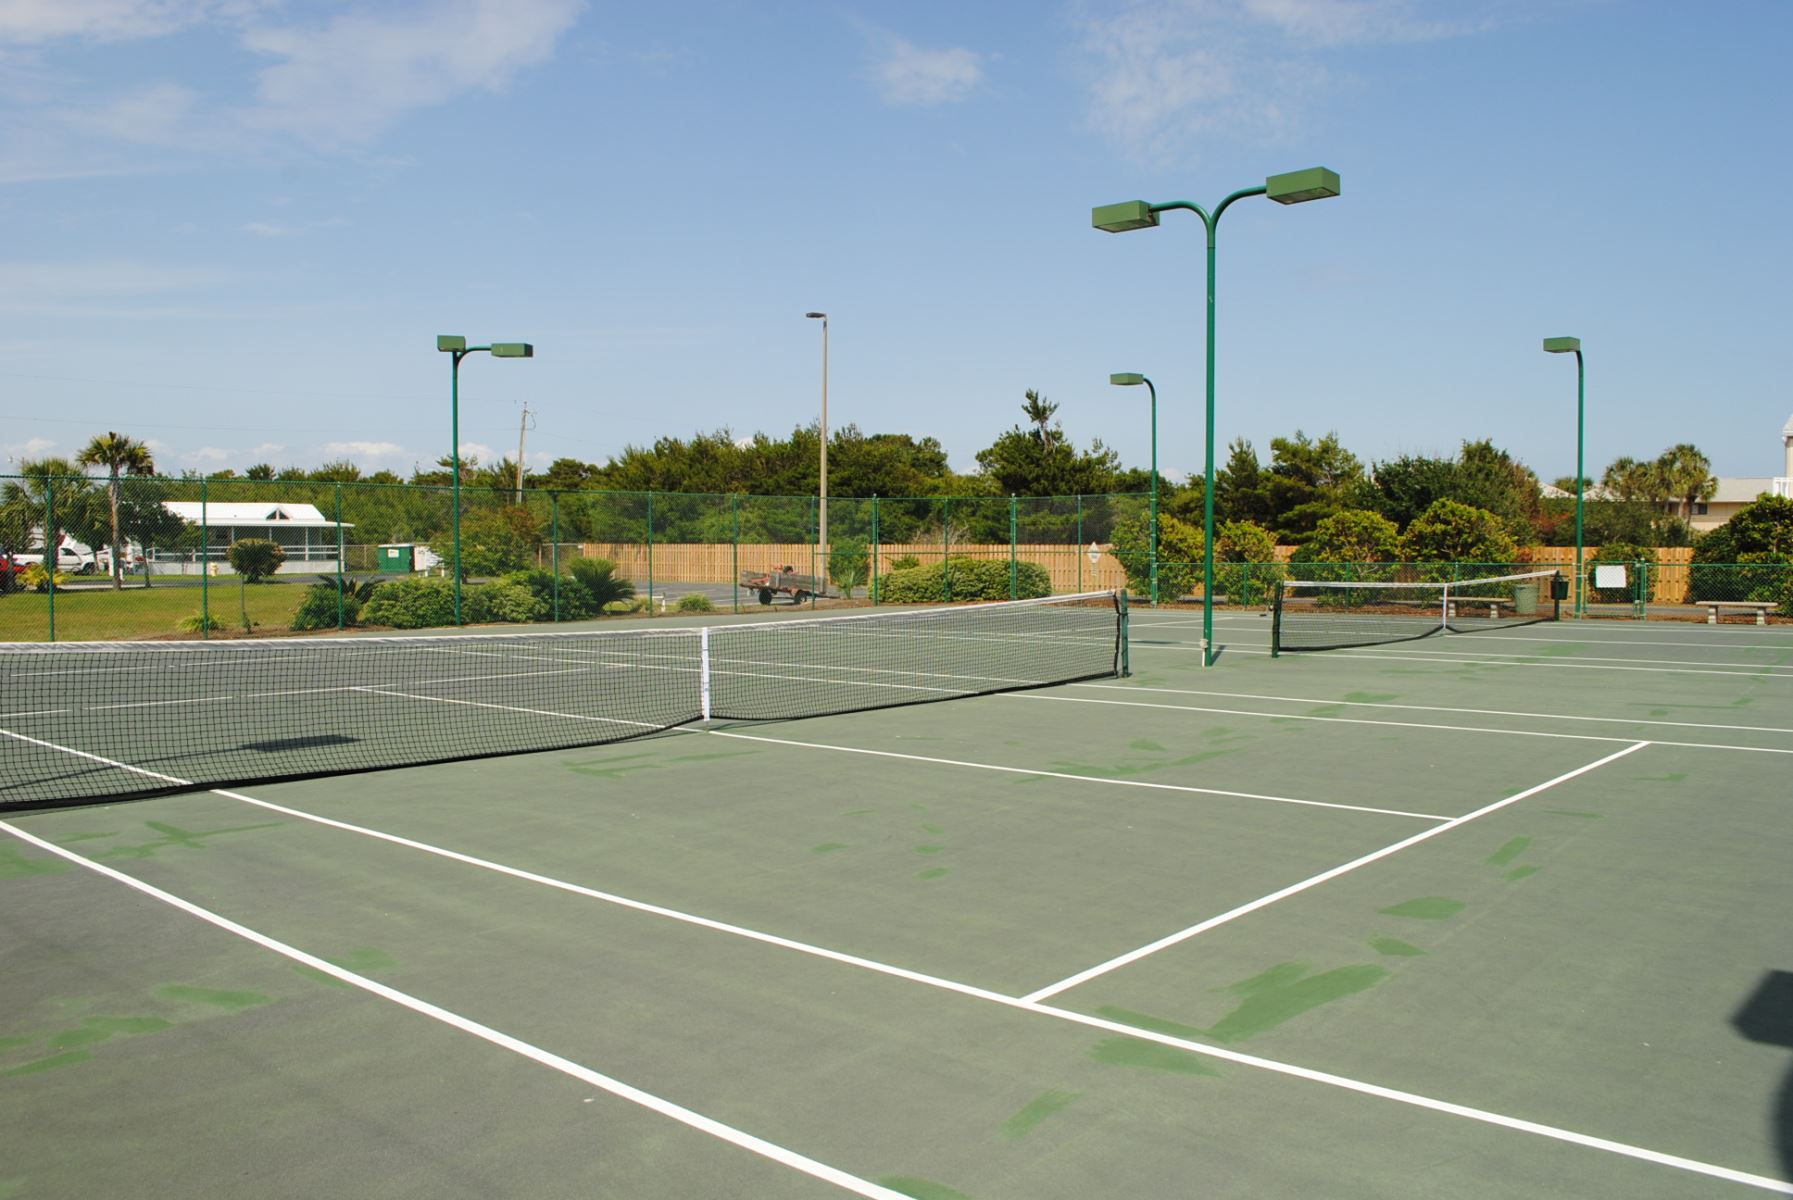 Do you Tennis? You will have free access to 2 lighted courts. Enjoy!